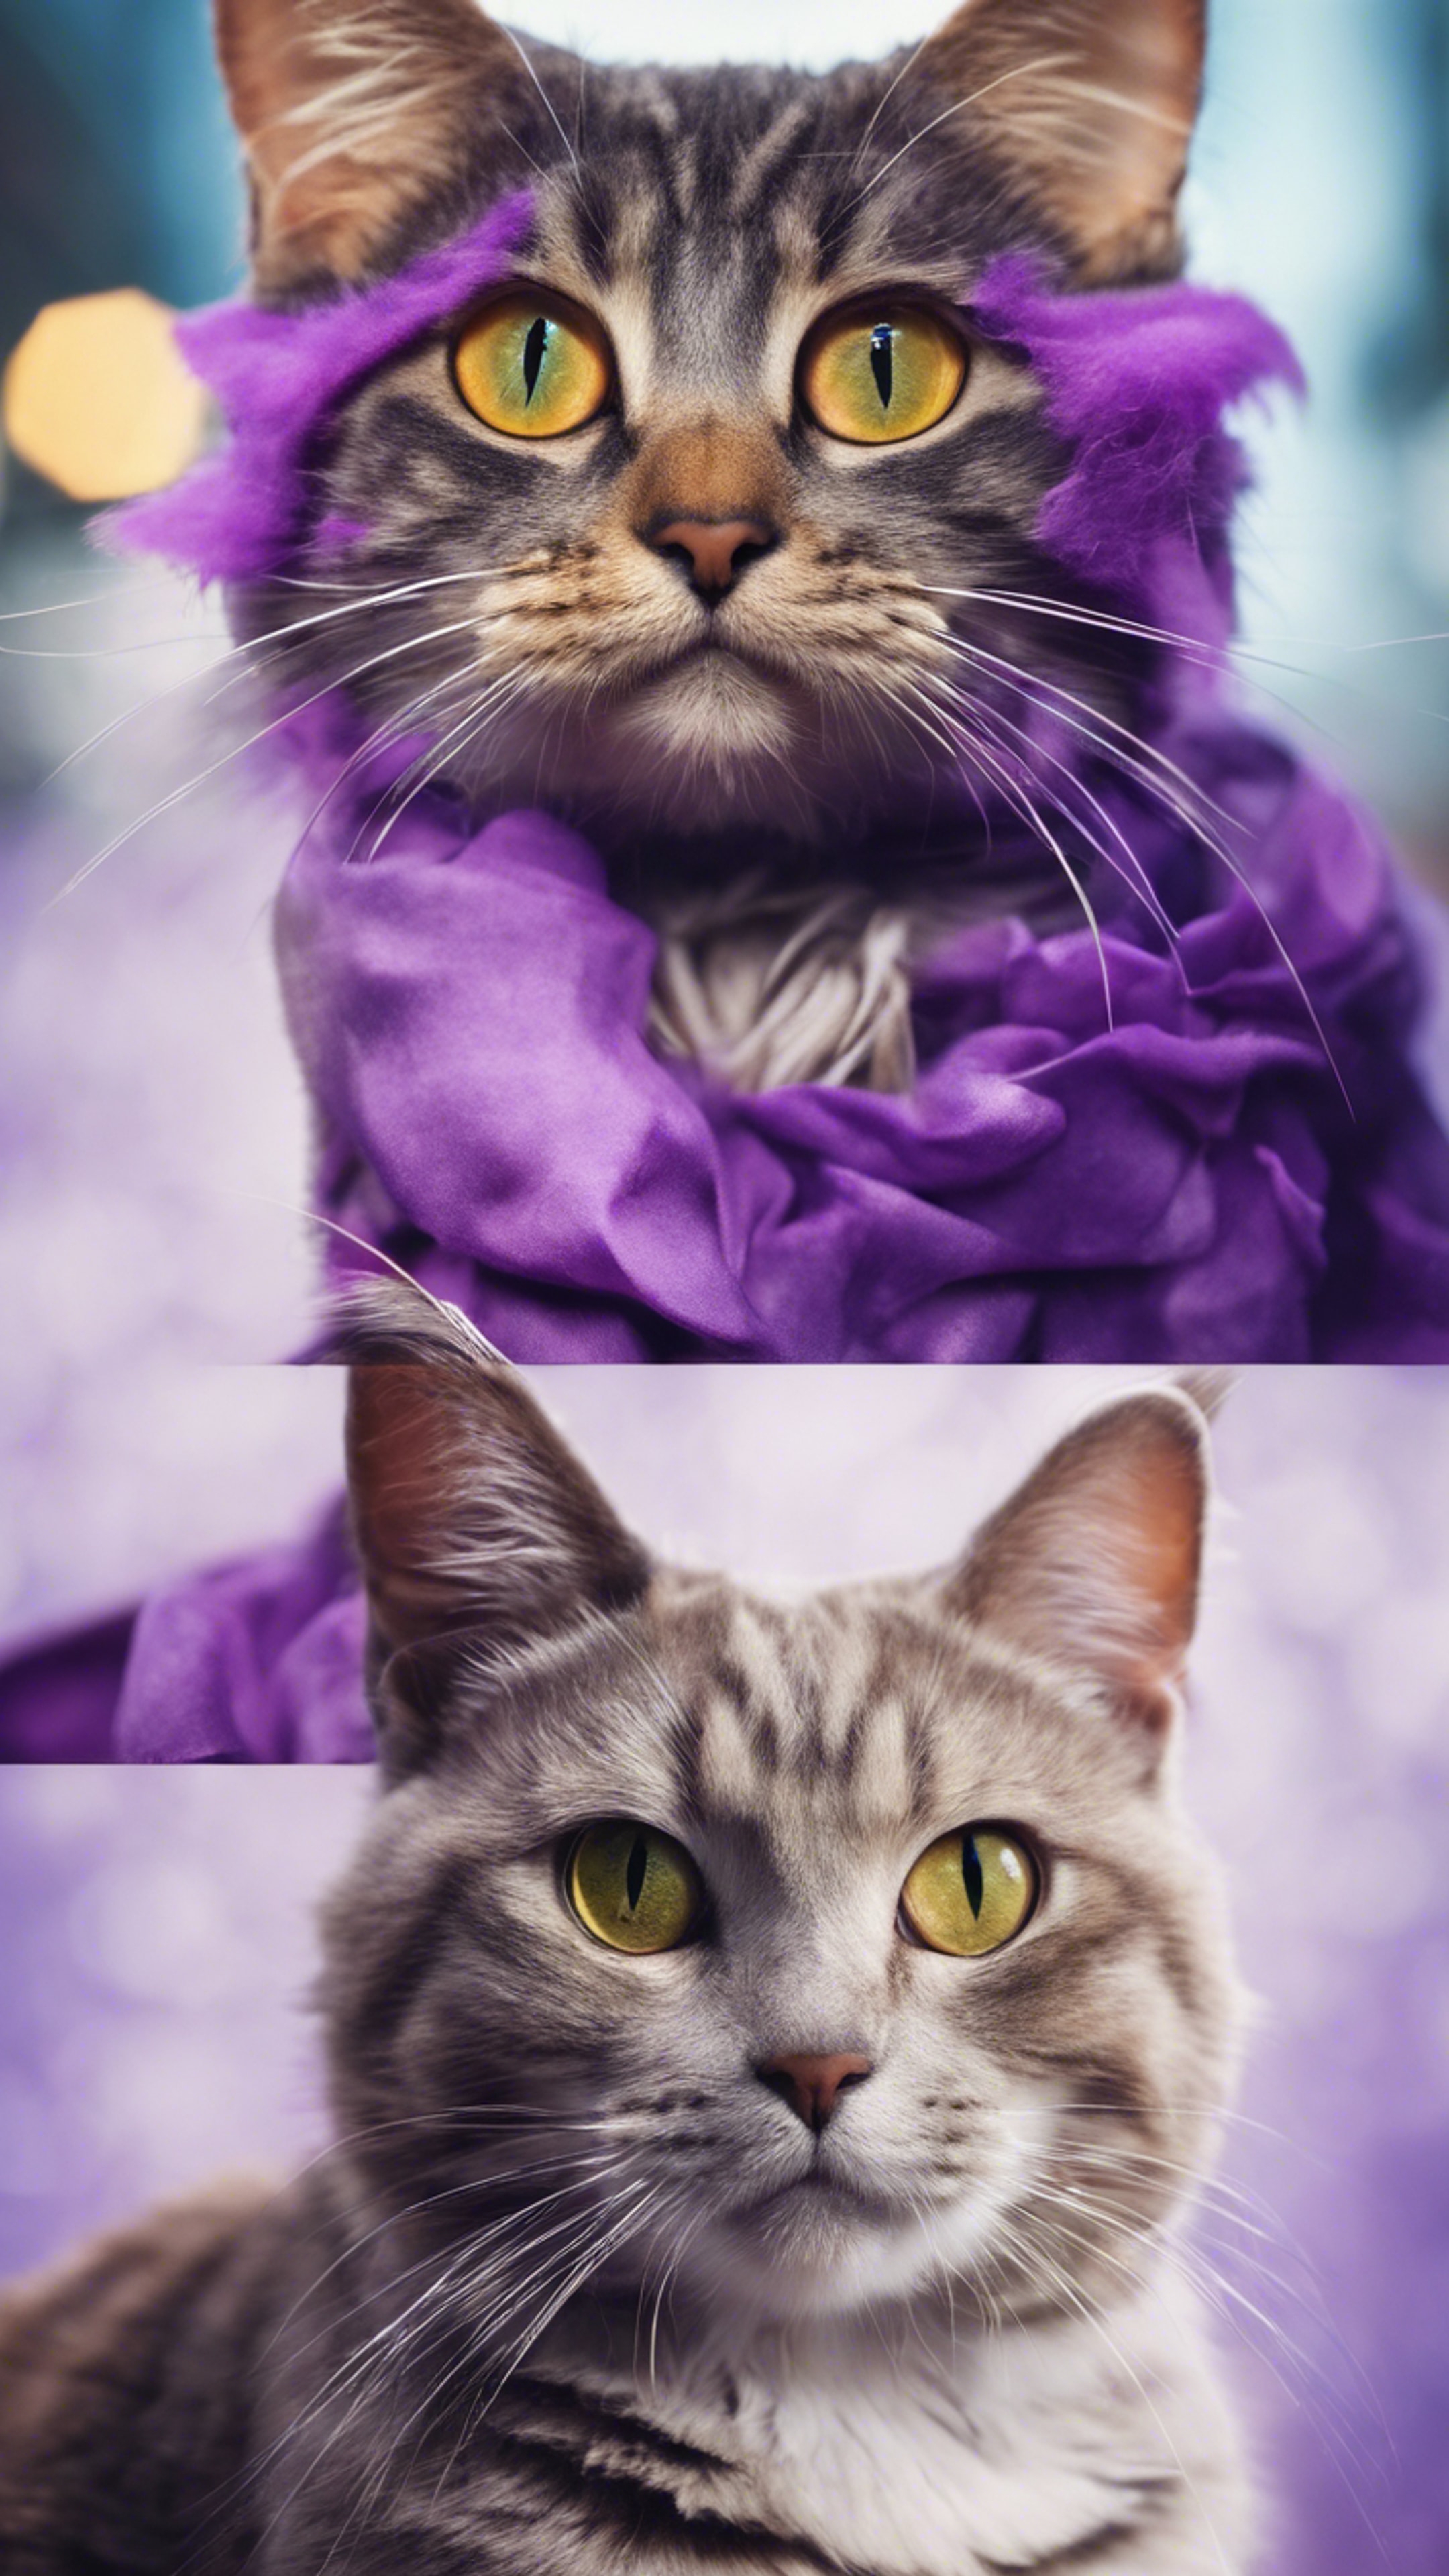 A playful collage showcasing various breeds of cats, all with unusual purple fur. Papel de parede[3a46628192d3463088be]